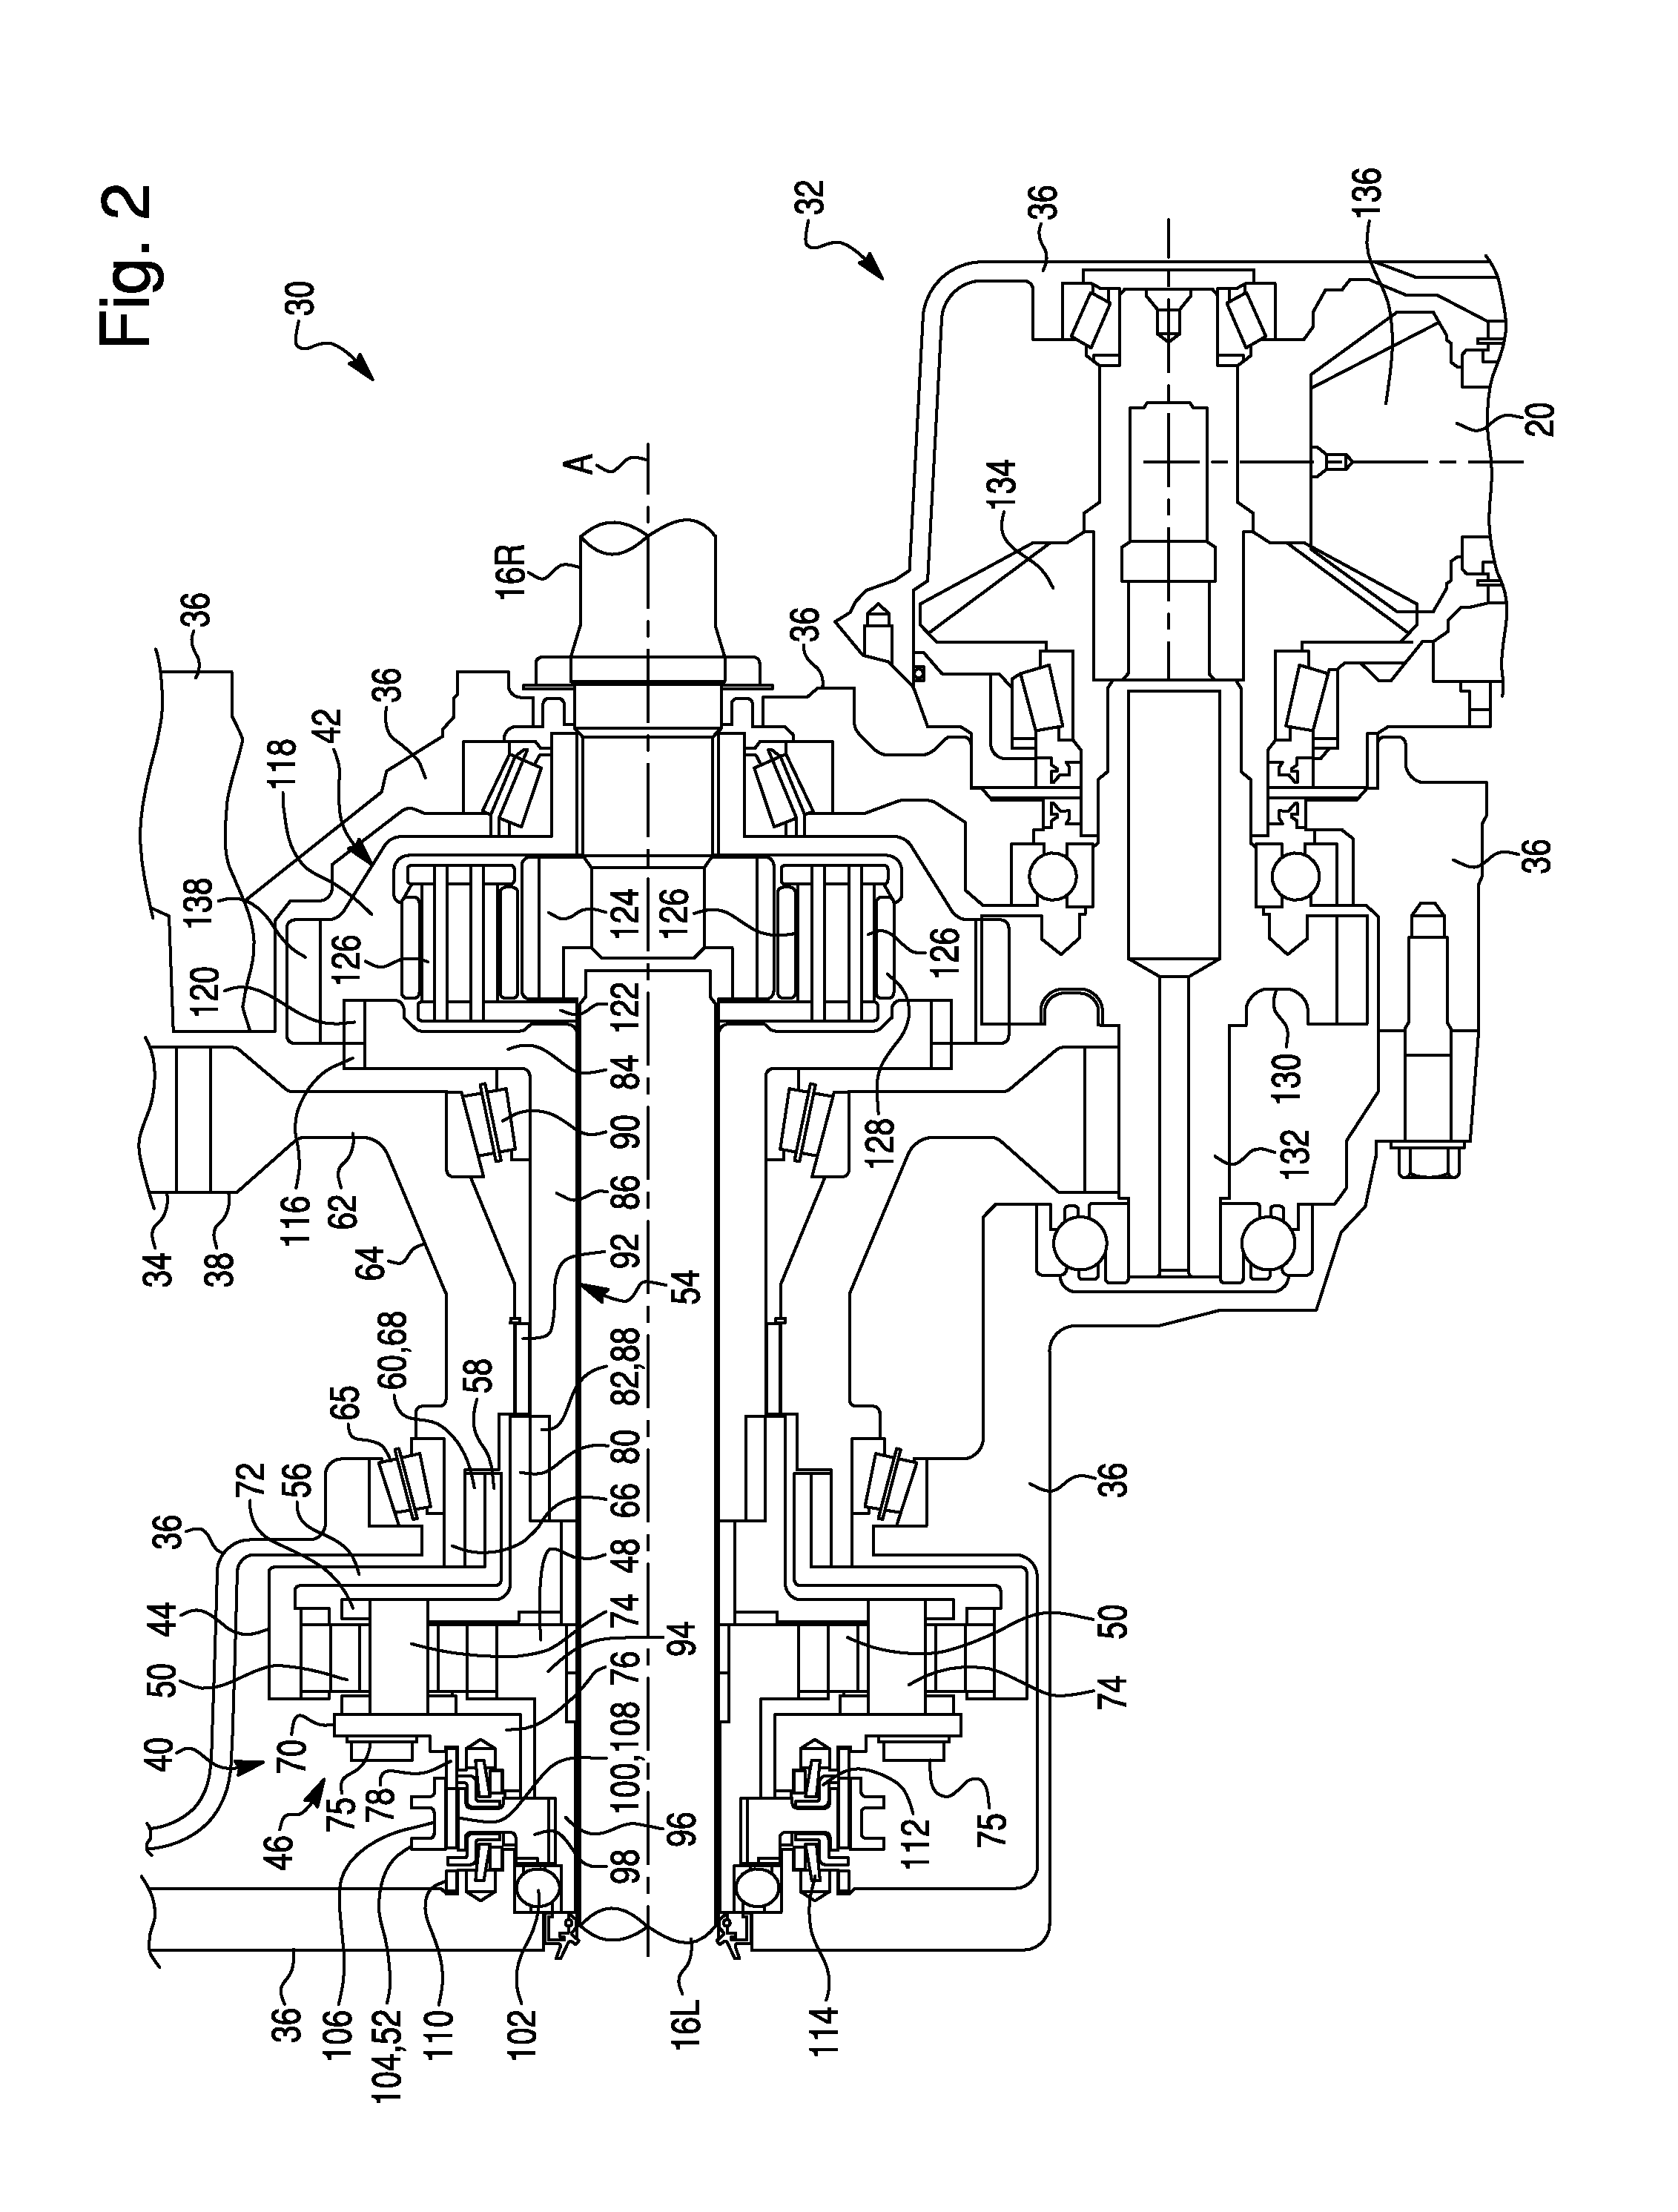 Transversely mounted transaxle having a low range gear assembly and powertrain for a vehicle including same